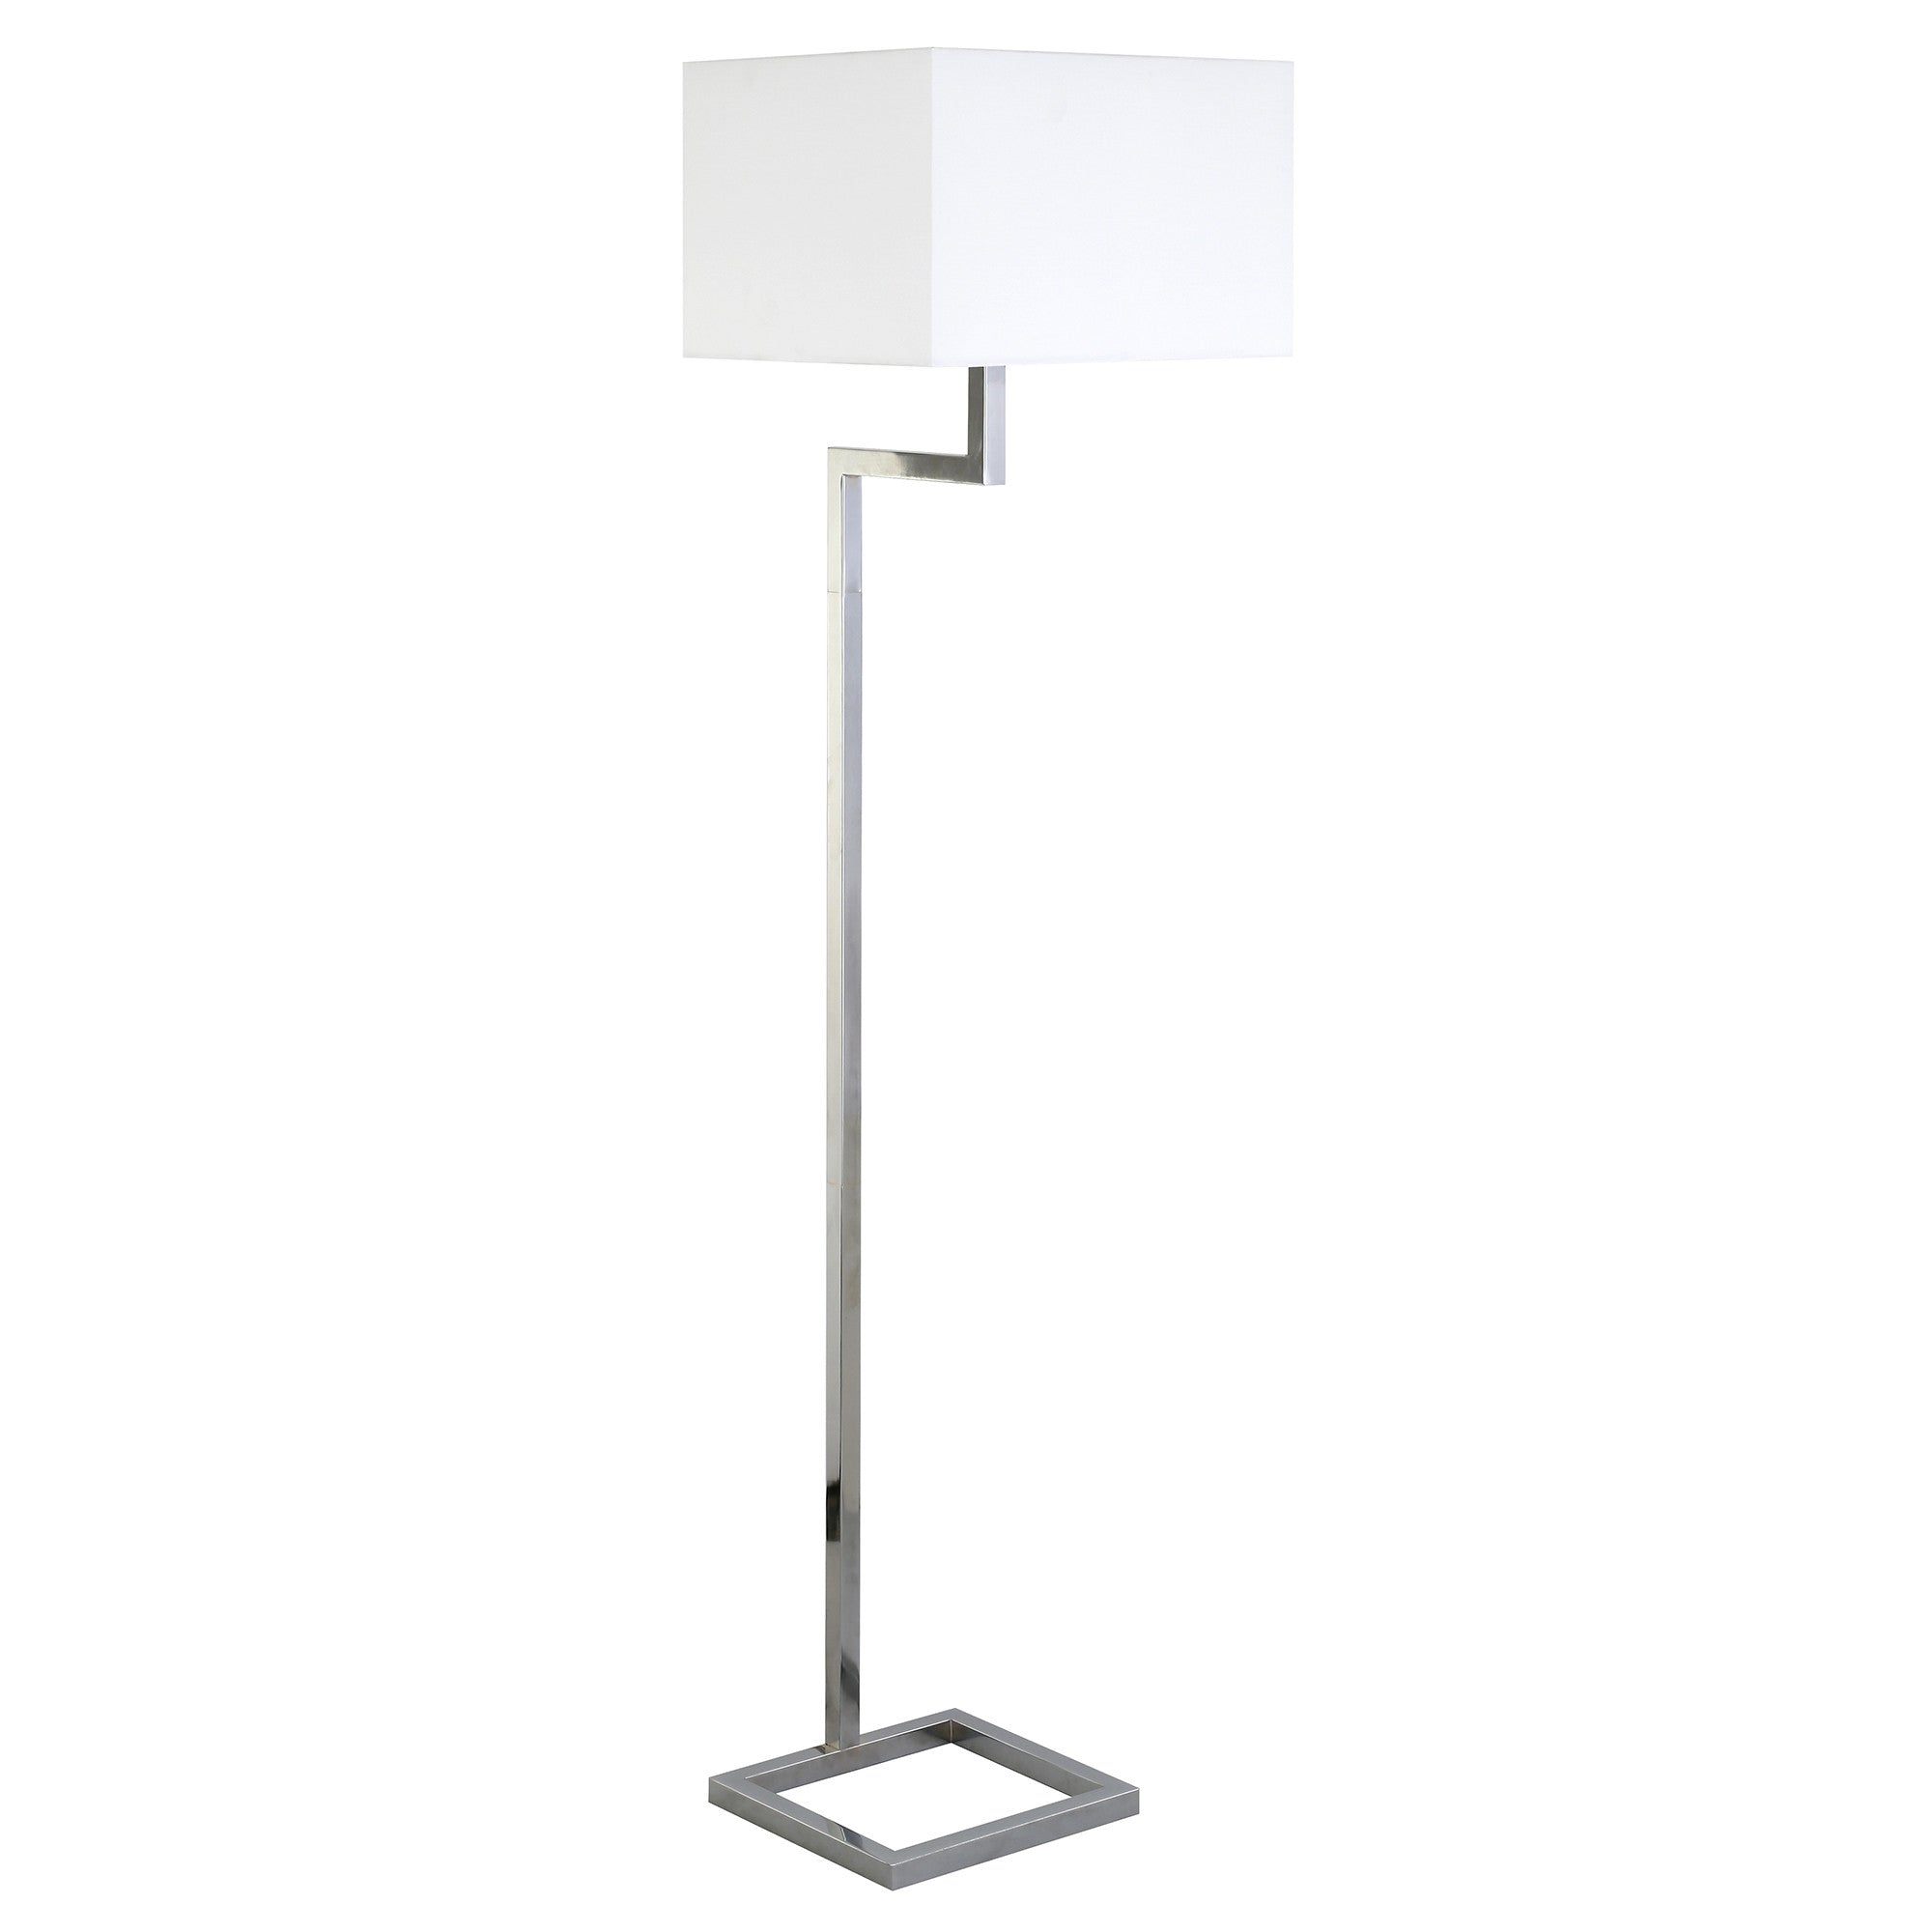 64" Nickel Floor Lamp With White Frosted Glass Rectangular Shade